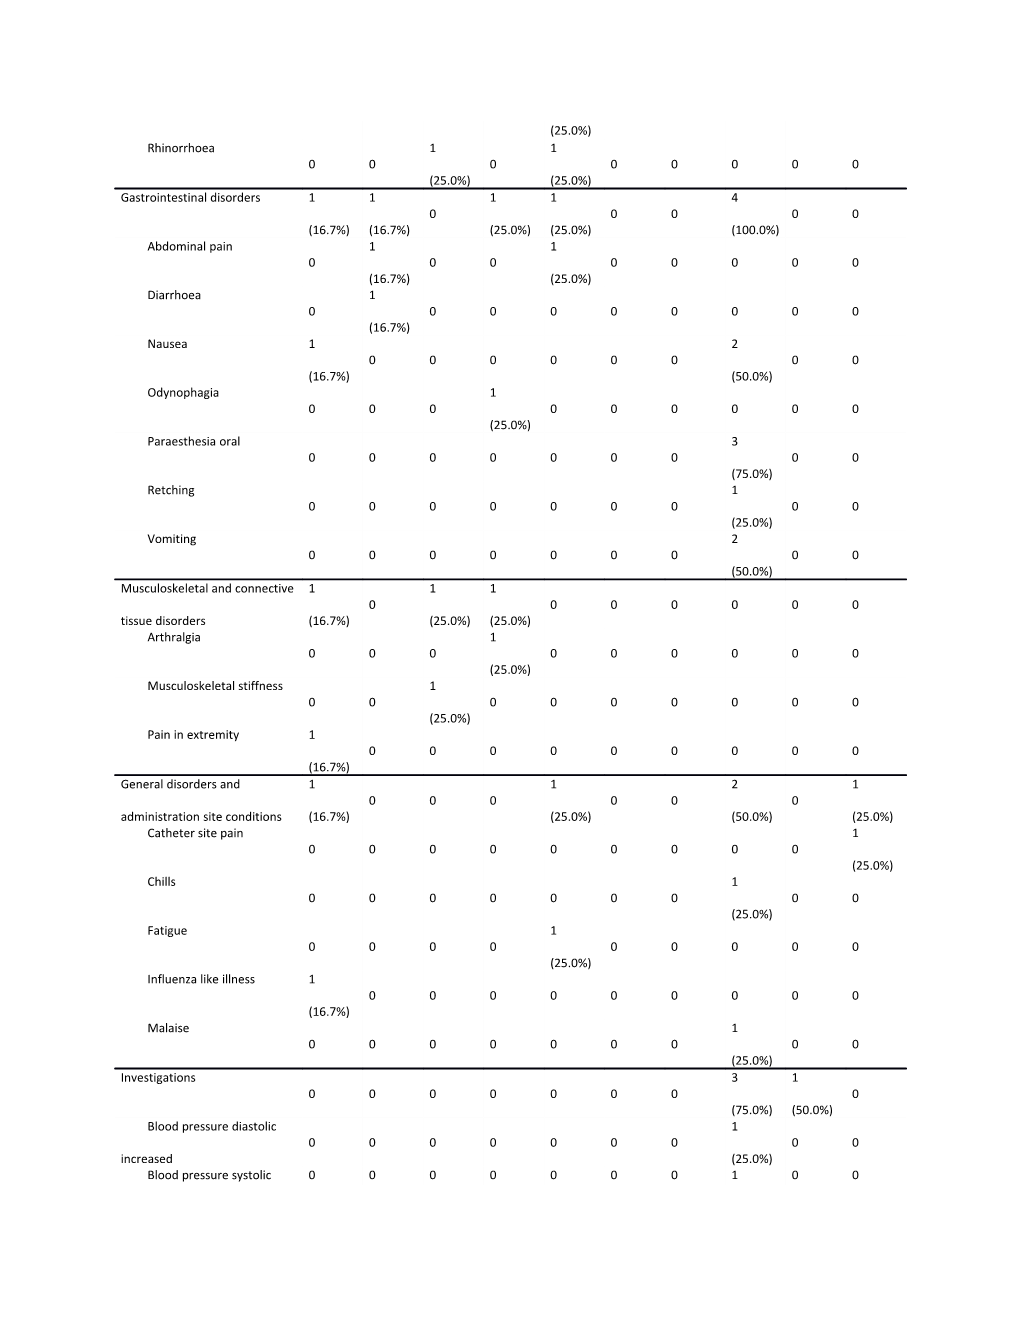 Table S1. Summary of Treatment-Emergent Adverse Events by System Organ Class and Preferred